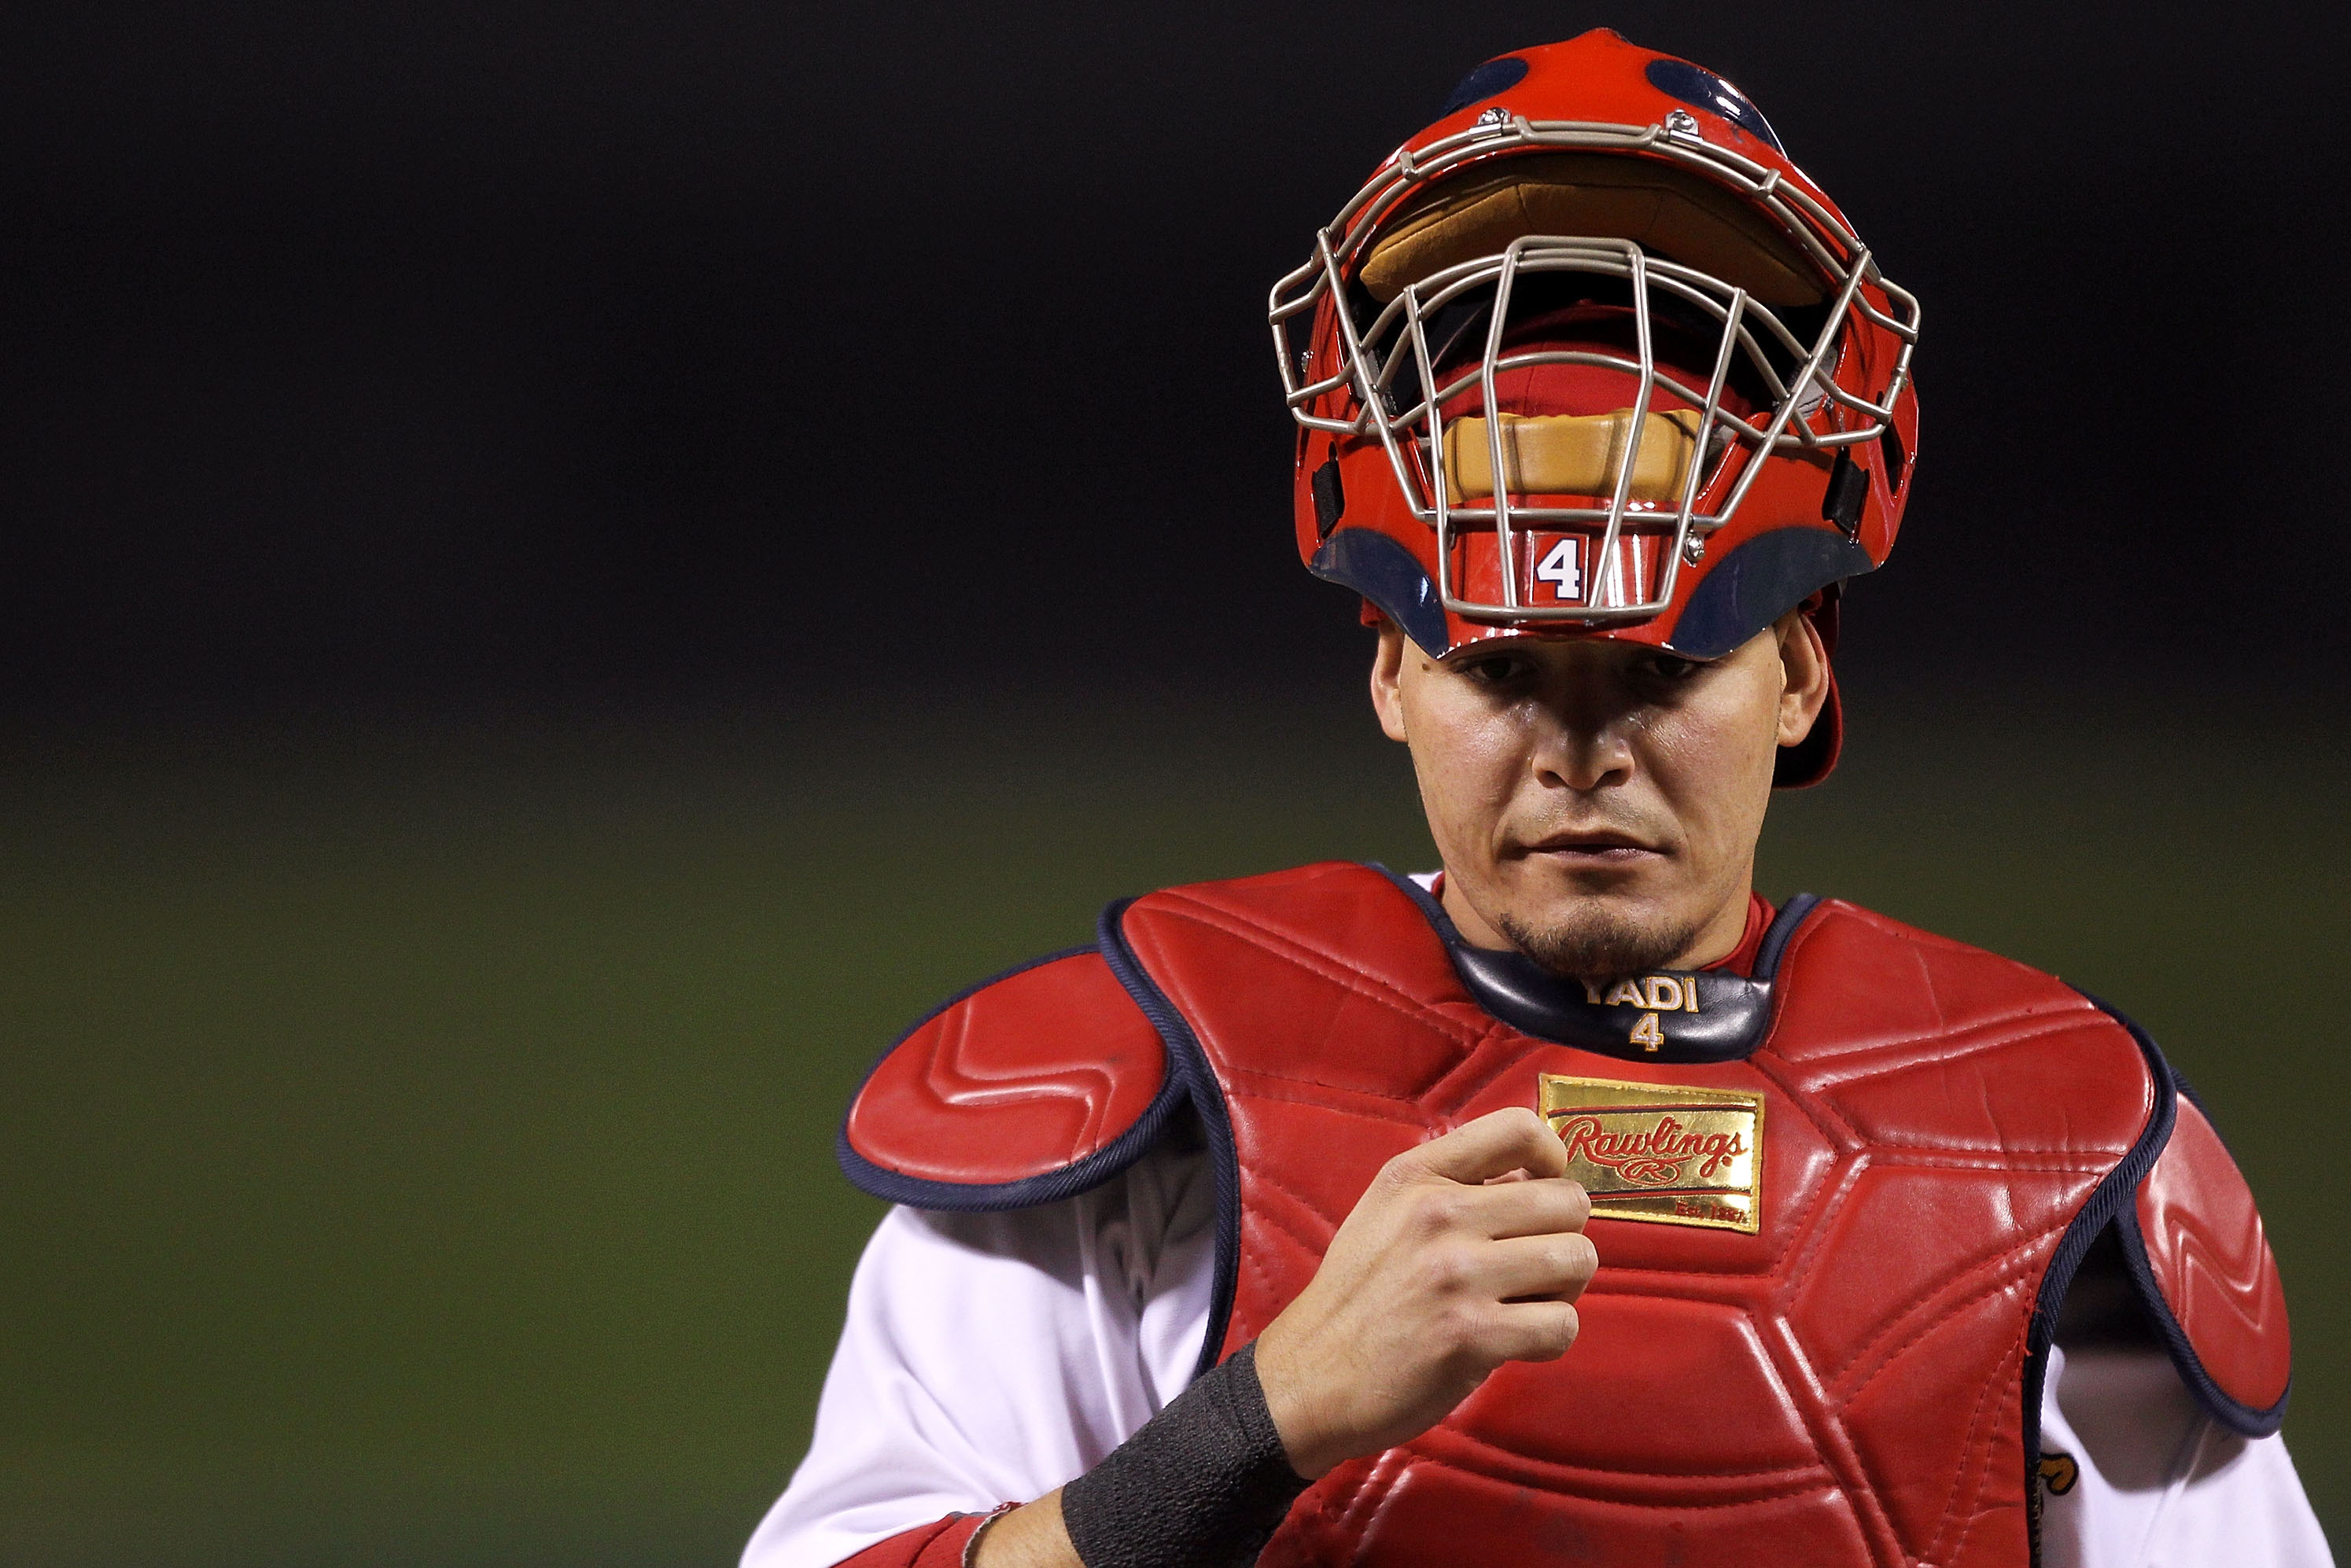 Report: Yadier Molina Likely to Become 2nd-Highest-Paid Catcher in